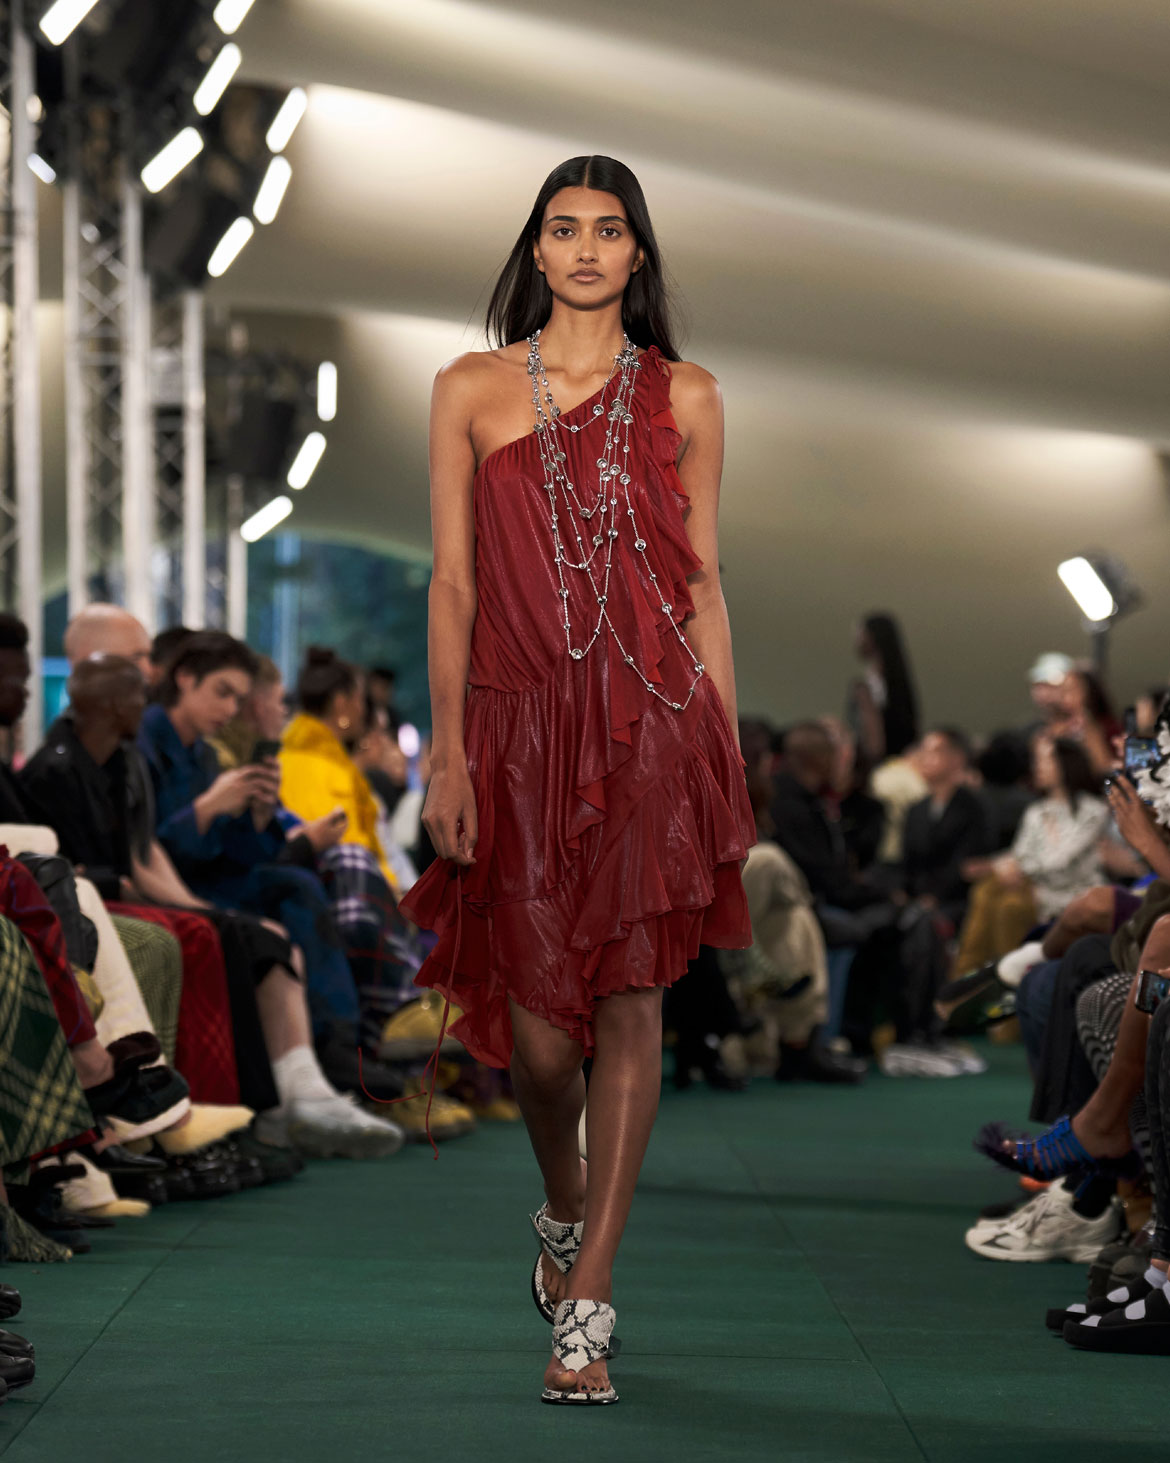 Burberry Makes a Triumphant Return to the Runway